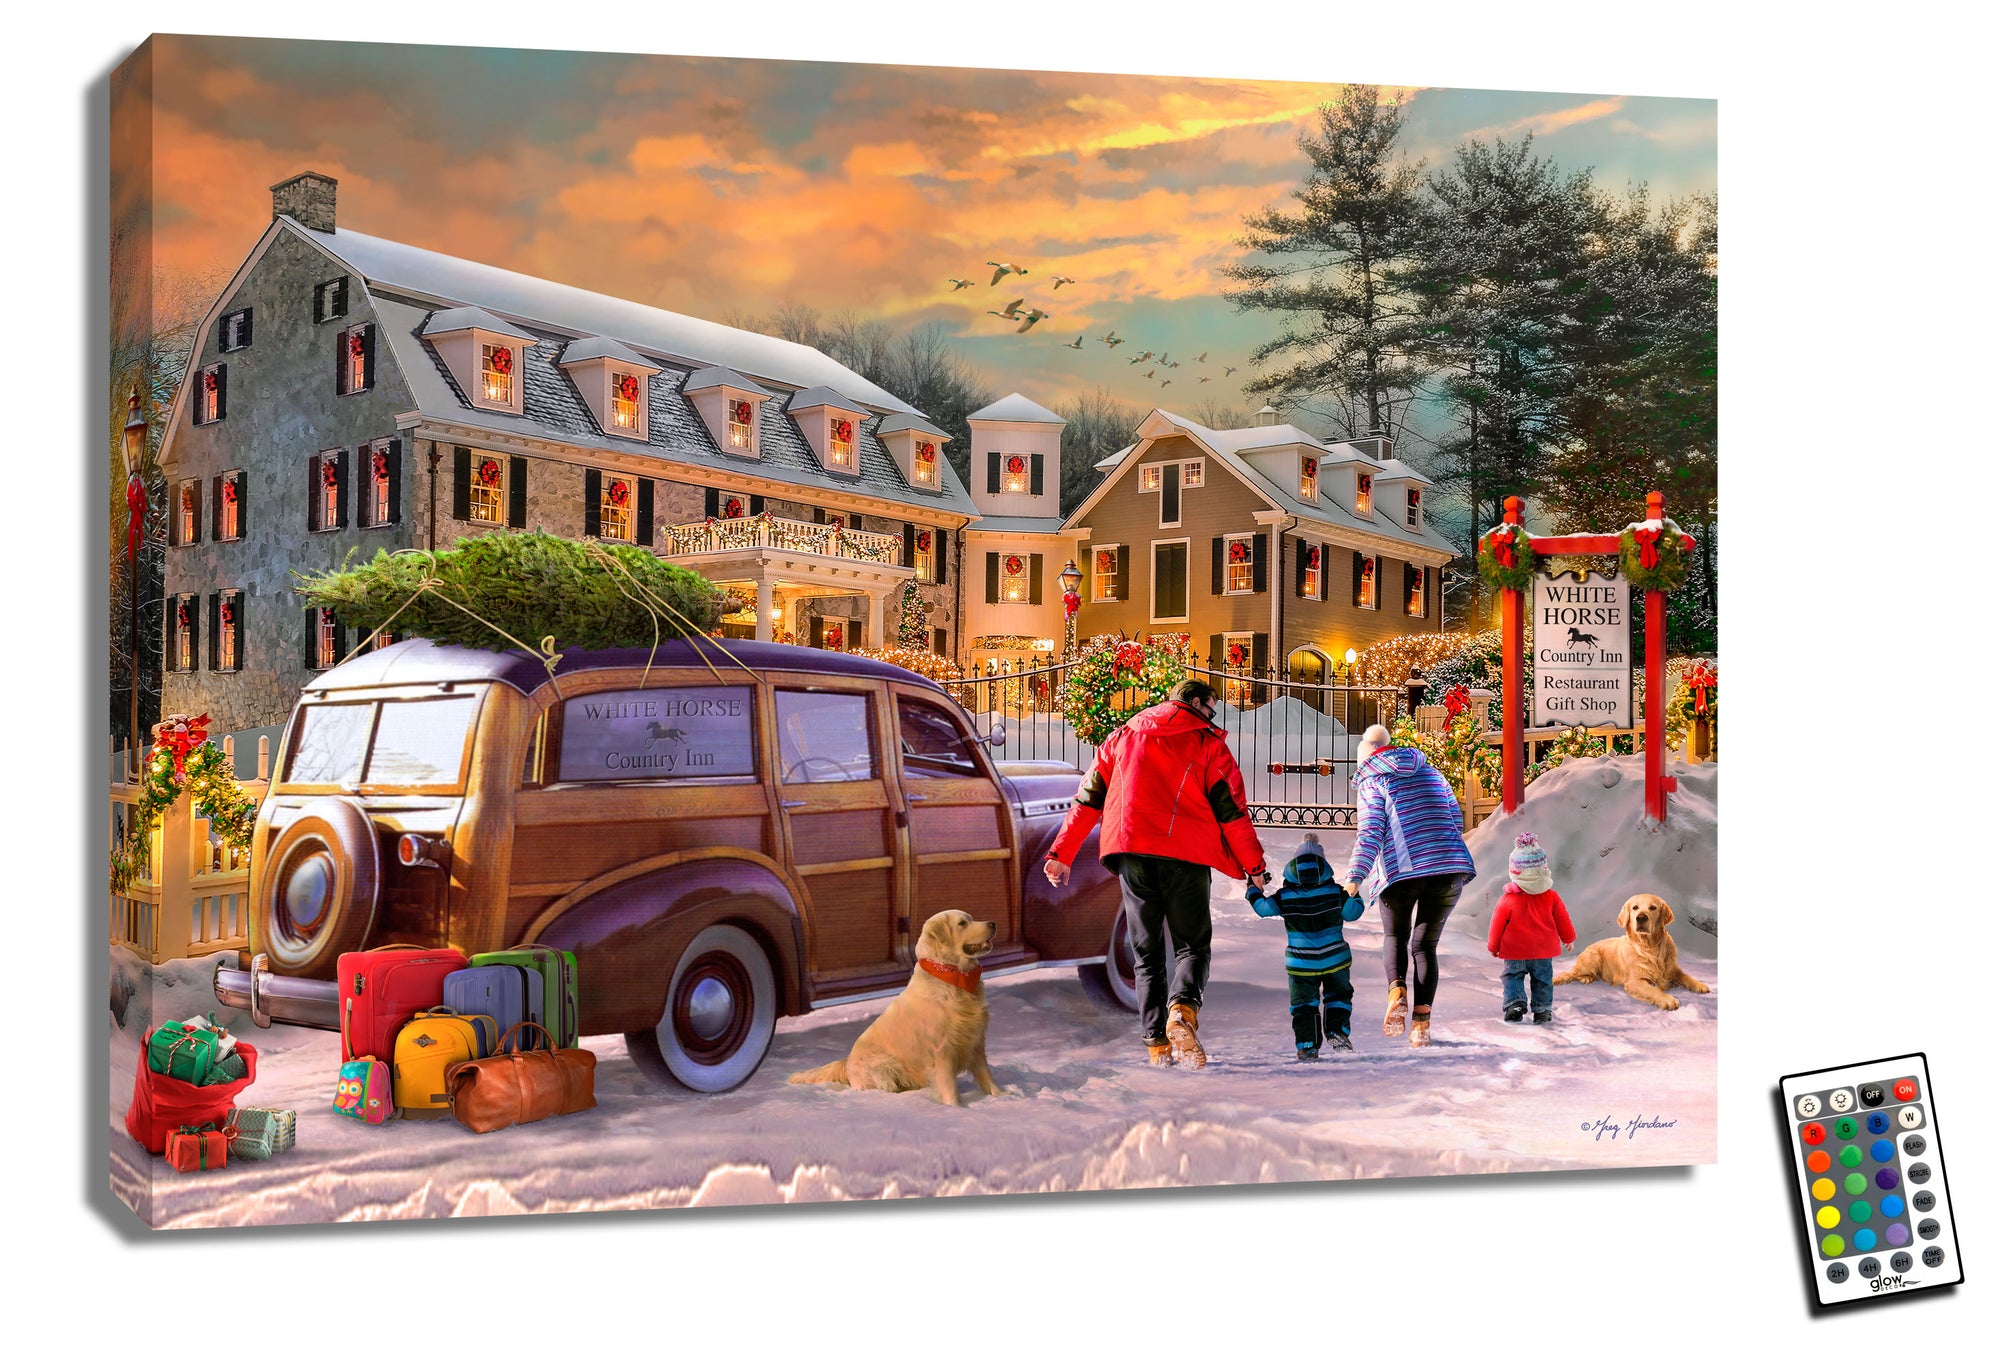 With an old station wagon parked nearby, complete with a tree tied to the top and luggage loaded in the back, this artwork transports you to a simpler time when road trips were the norm and family vacations were eagerly anticipated. Adding to the idyllic ambiance are two golden retrievers eagerly awaiting their adventure alongside their beloved family.